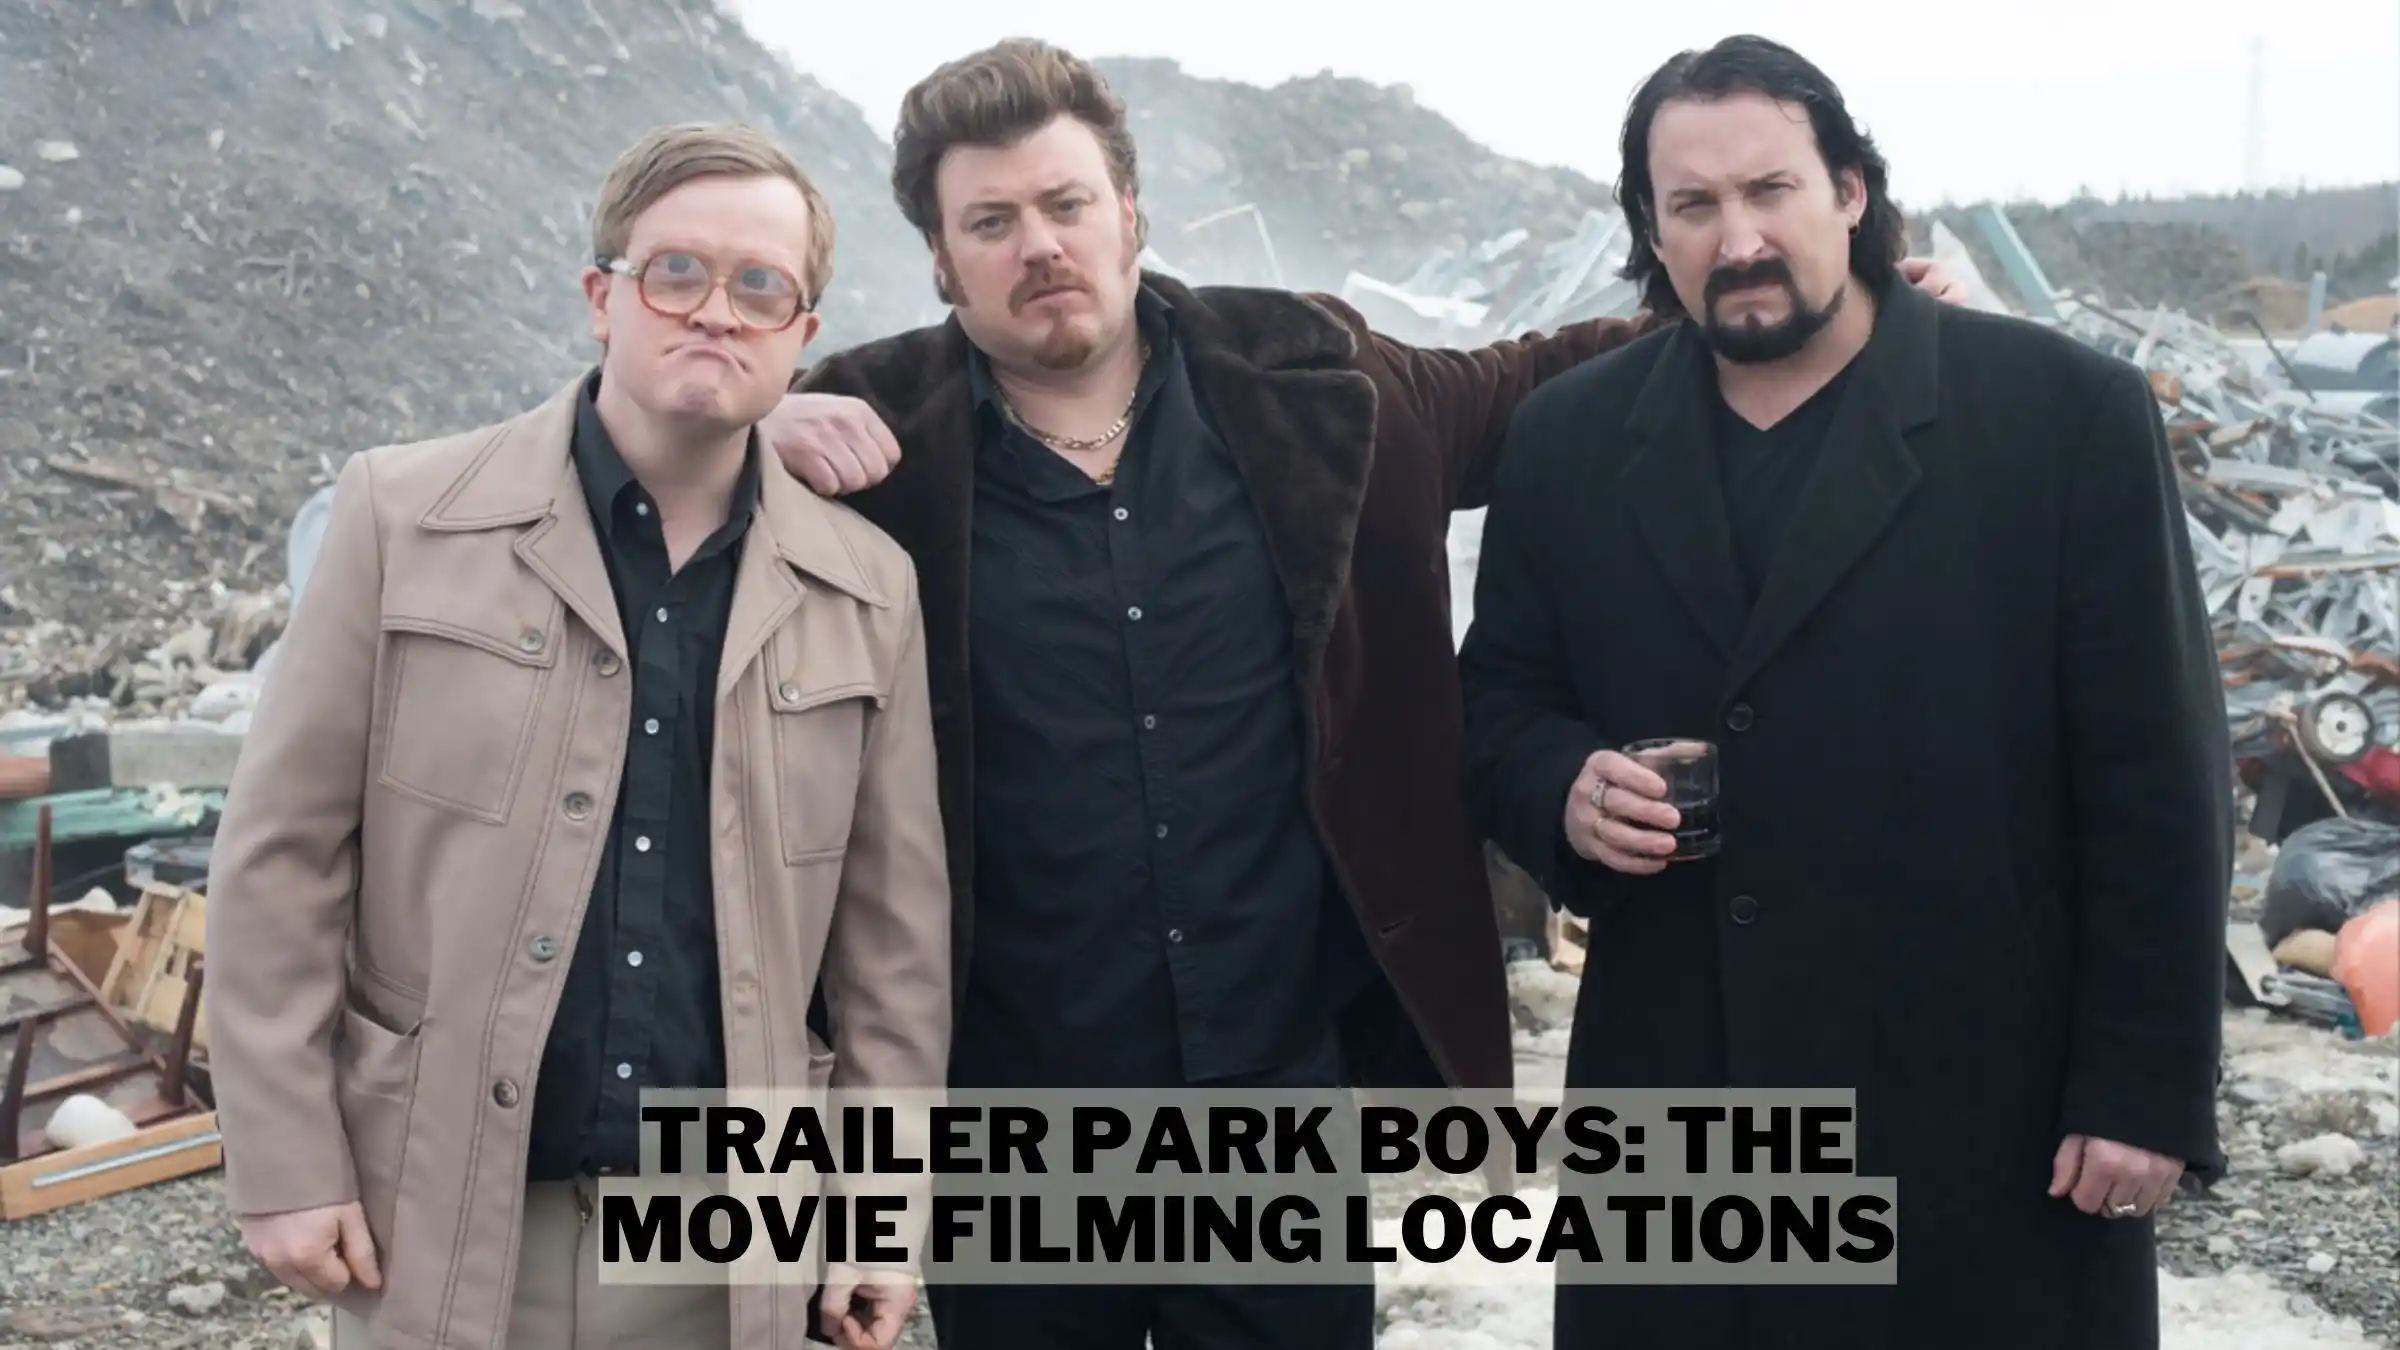 Trailer Park Boys: The Movie Filming Locations